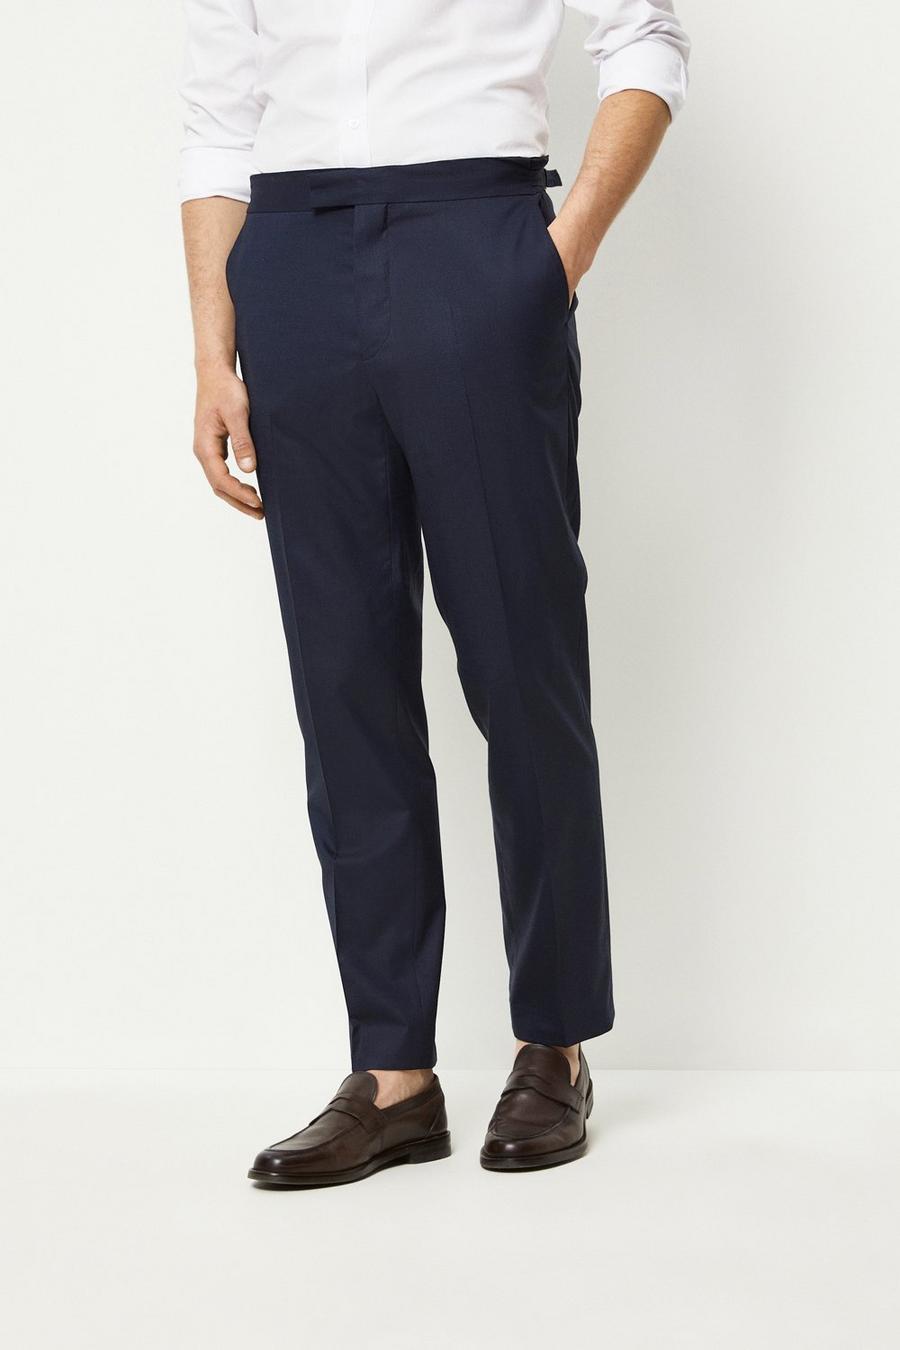 194 Tailored Fit Navy Suit Trouser